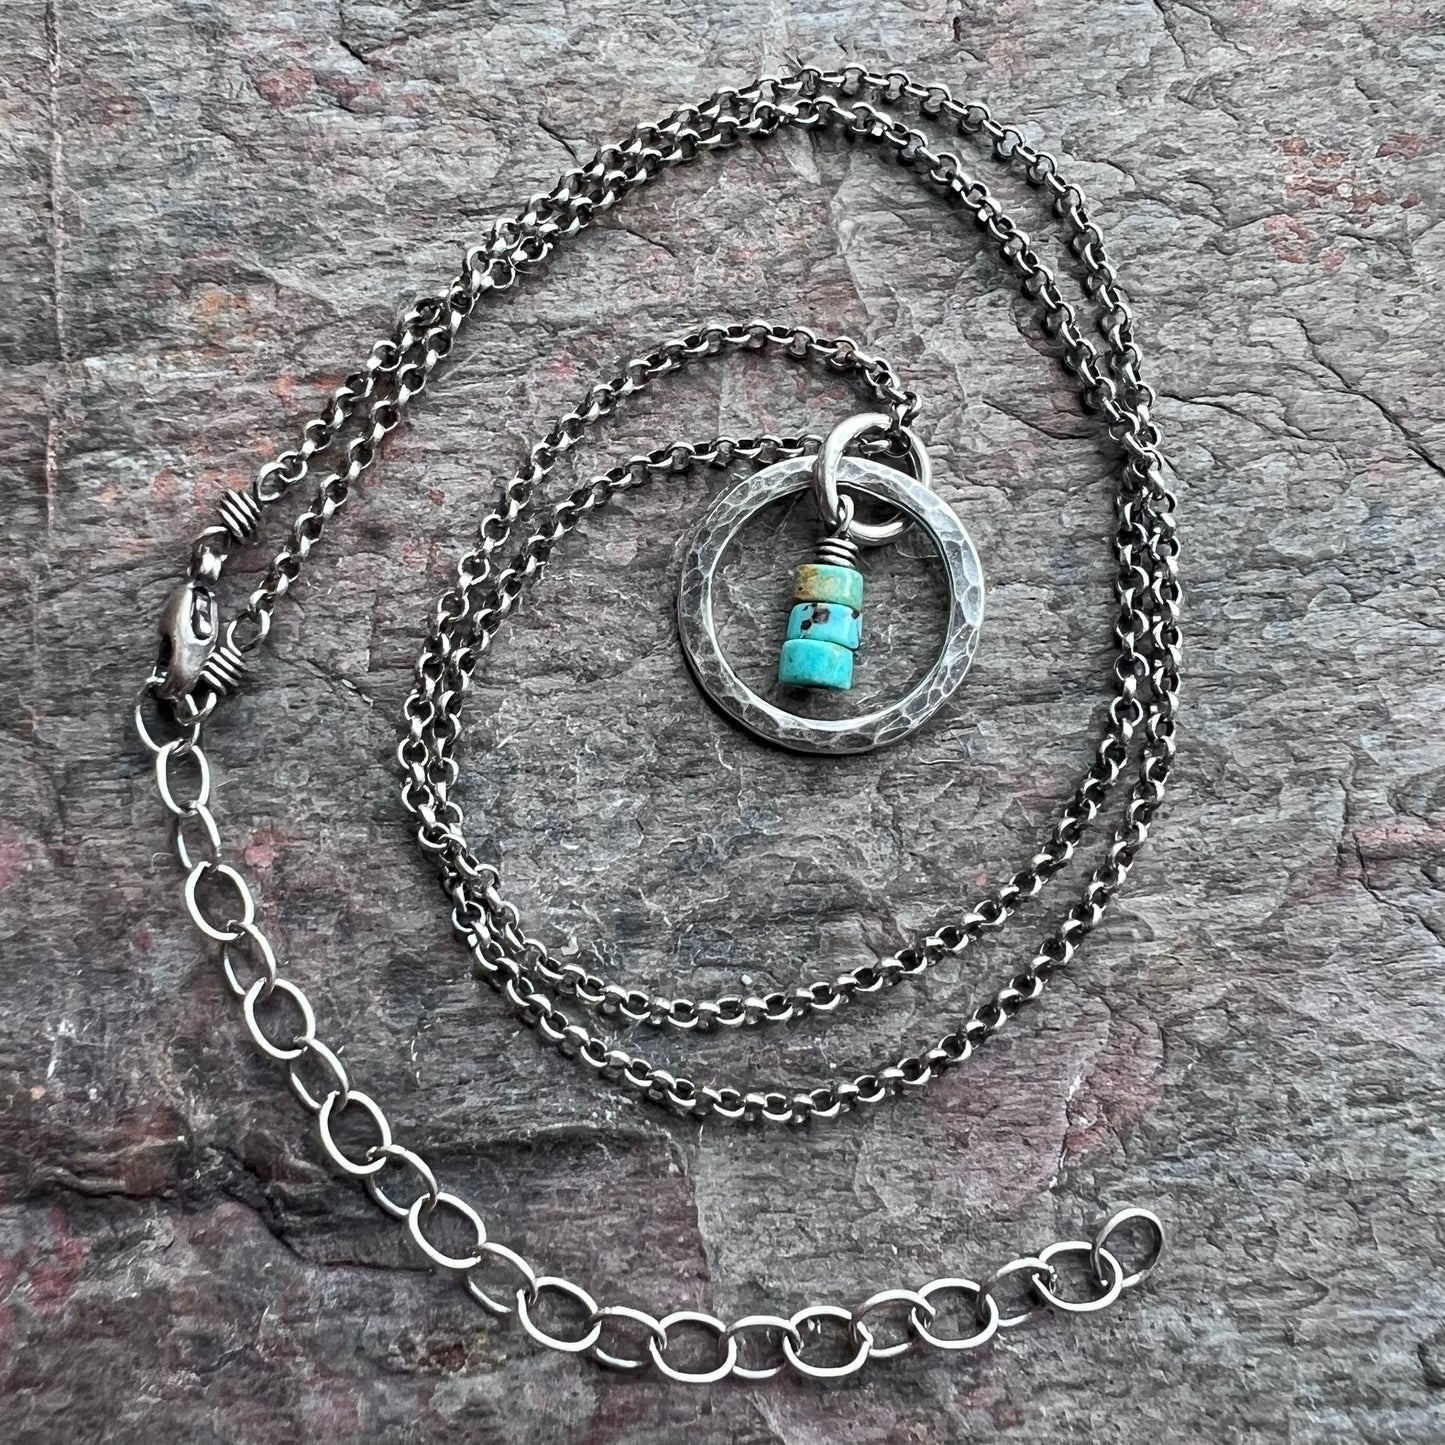 Turquoise Sterling Silver Necklace - Genuine Turquoise in Hammered Circle Pendant on Sterling Silver